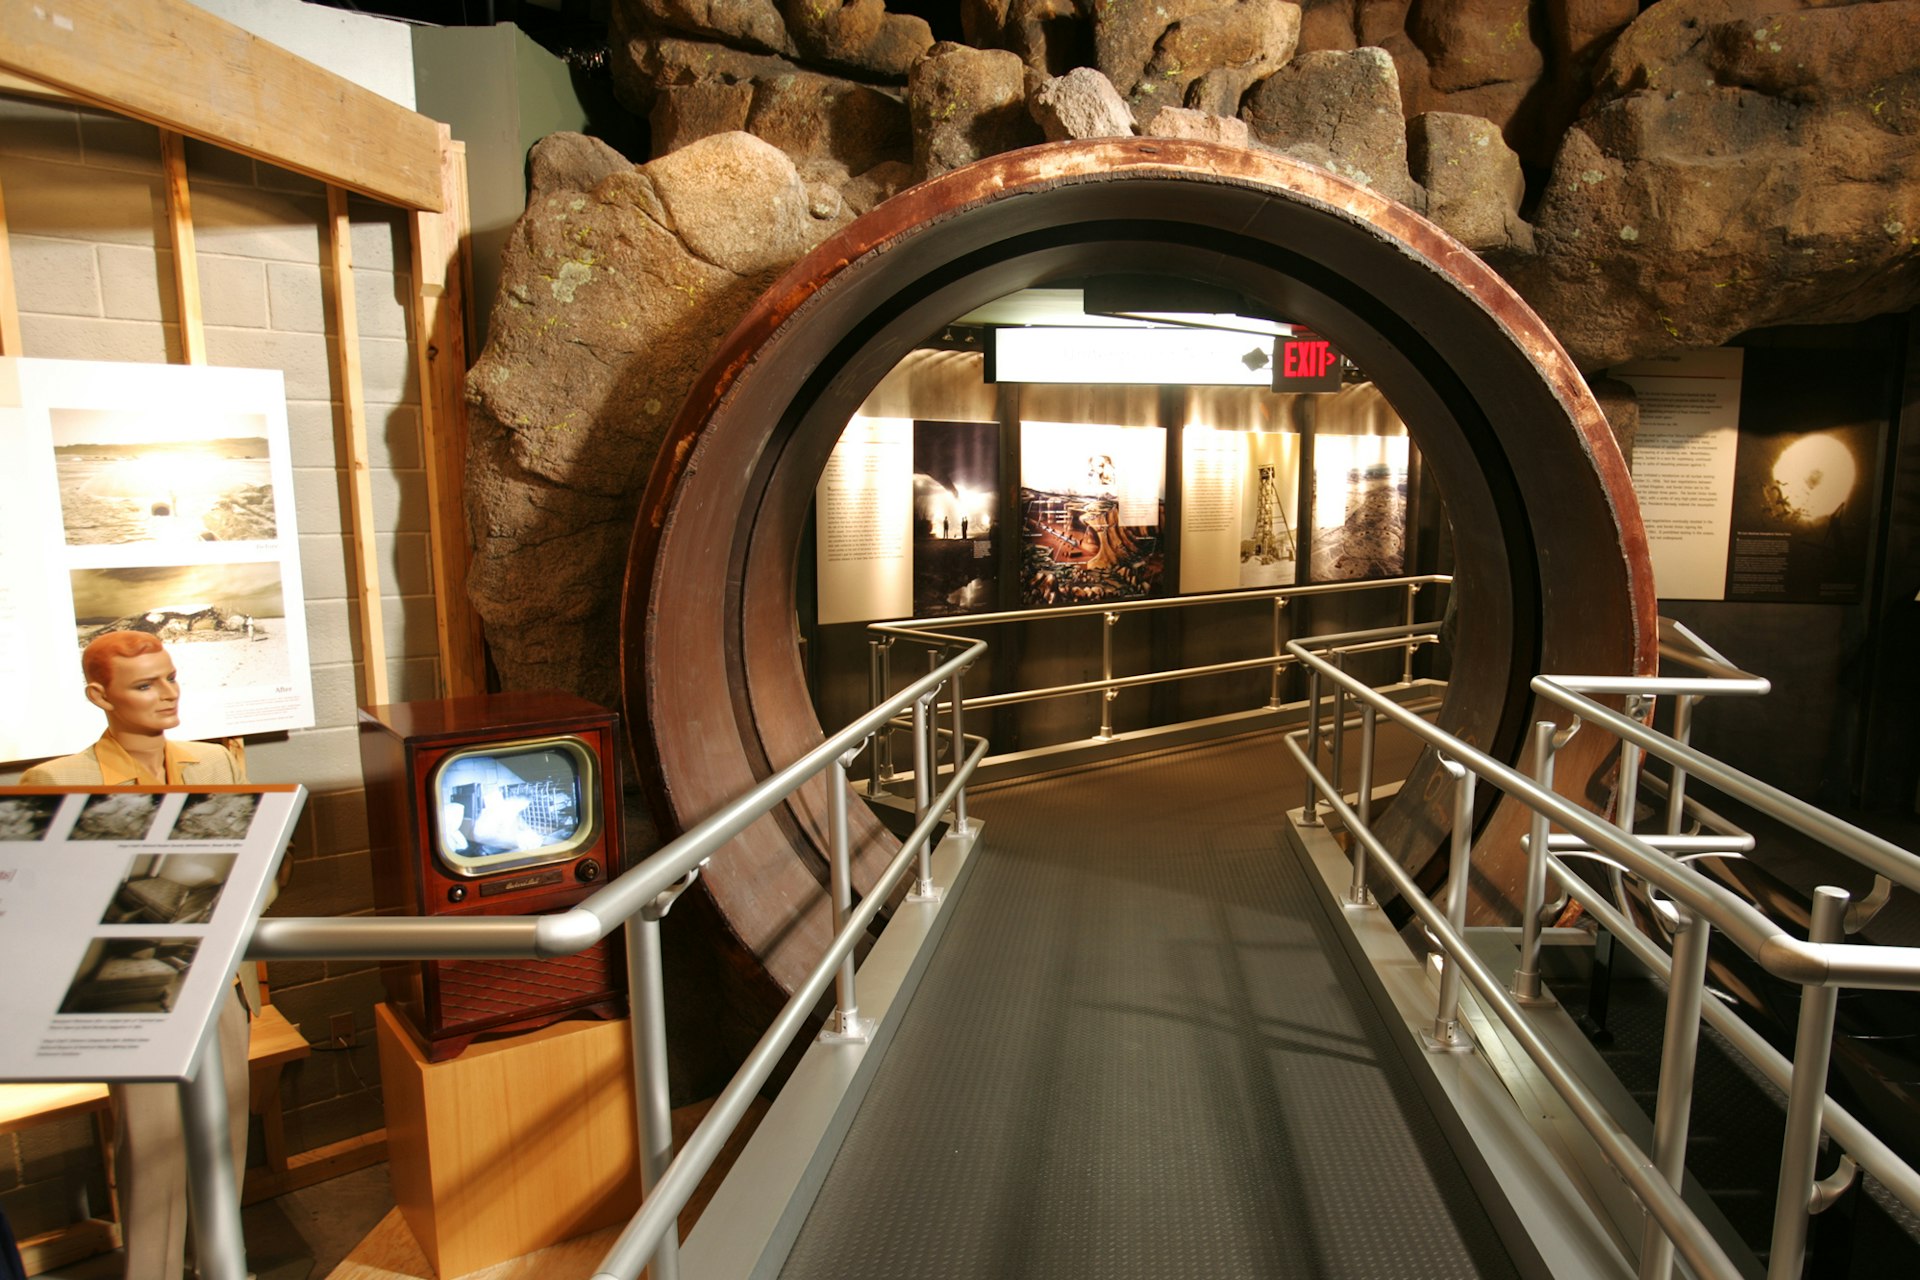 A walkway in the Atomic Testing Museum in Las Vegas. Image by Smart Destinations / CC BY-SA 2.0